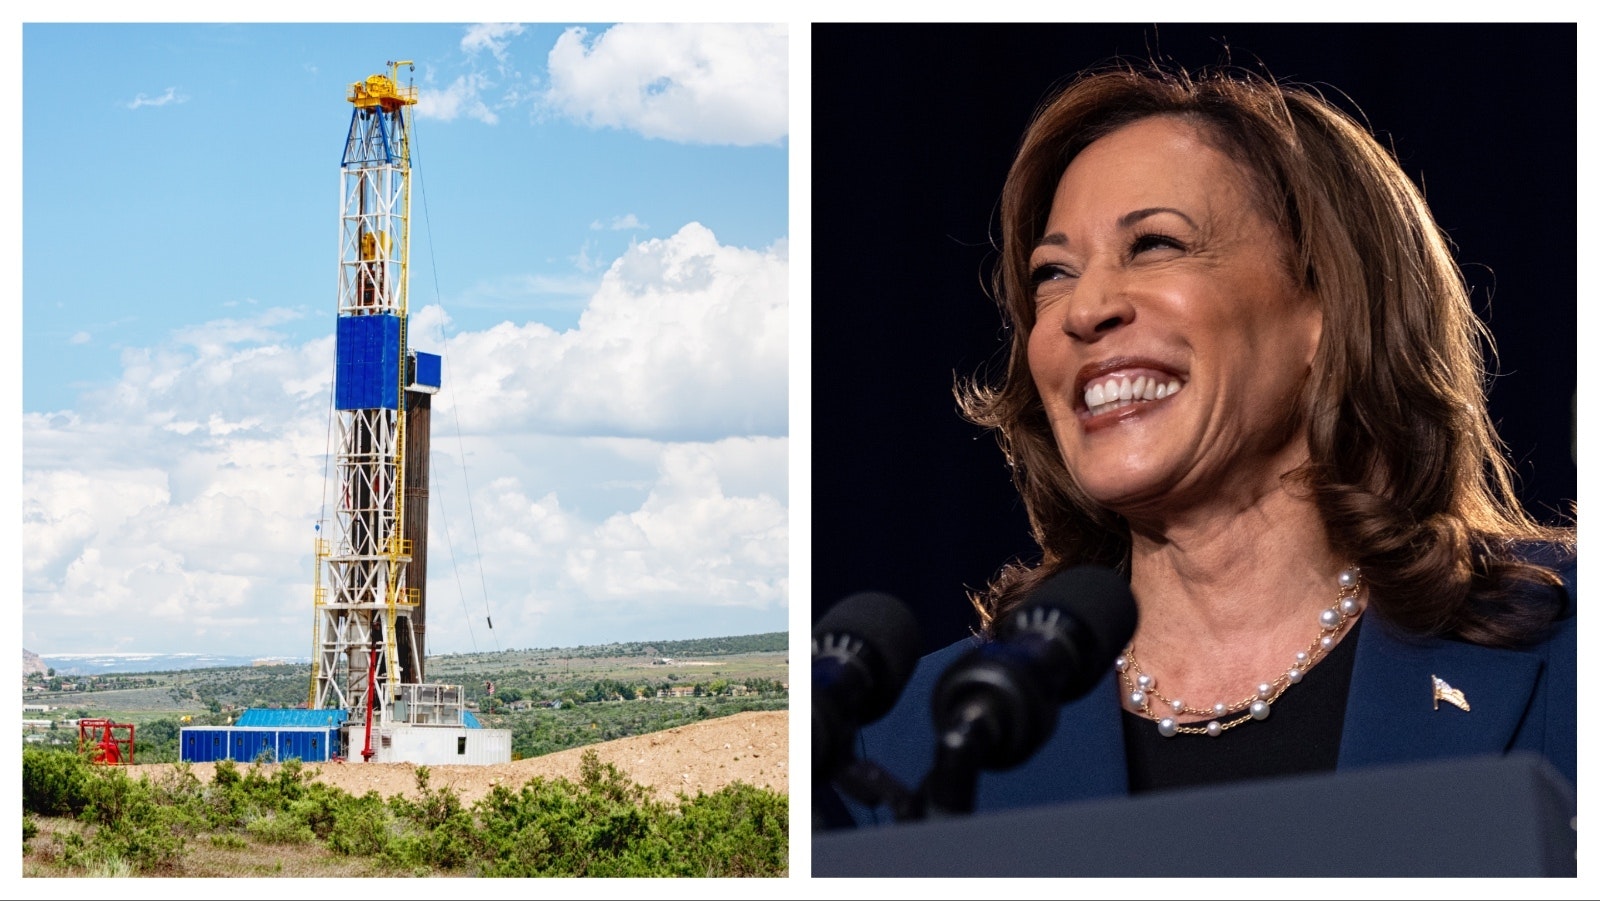 Kamala Harris is backing off her previous anti-fracking stance, but former President Donald Trump doesn't buy it.